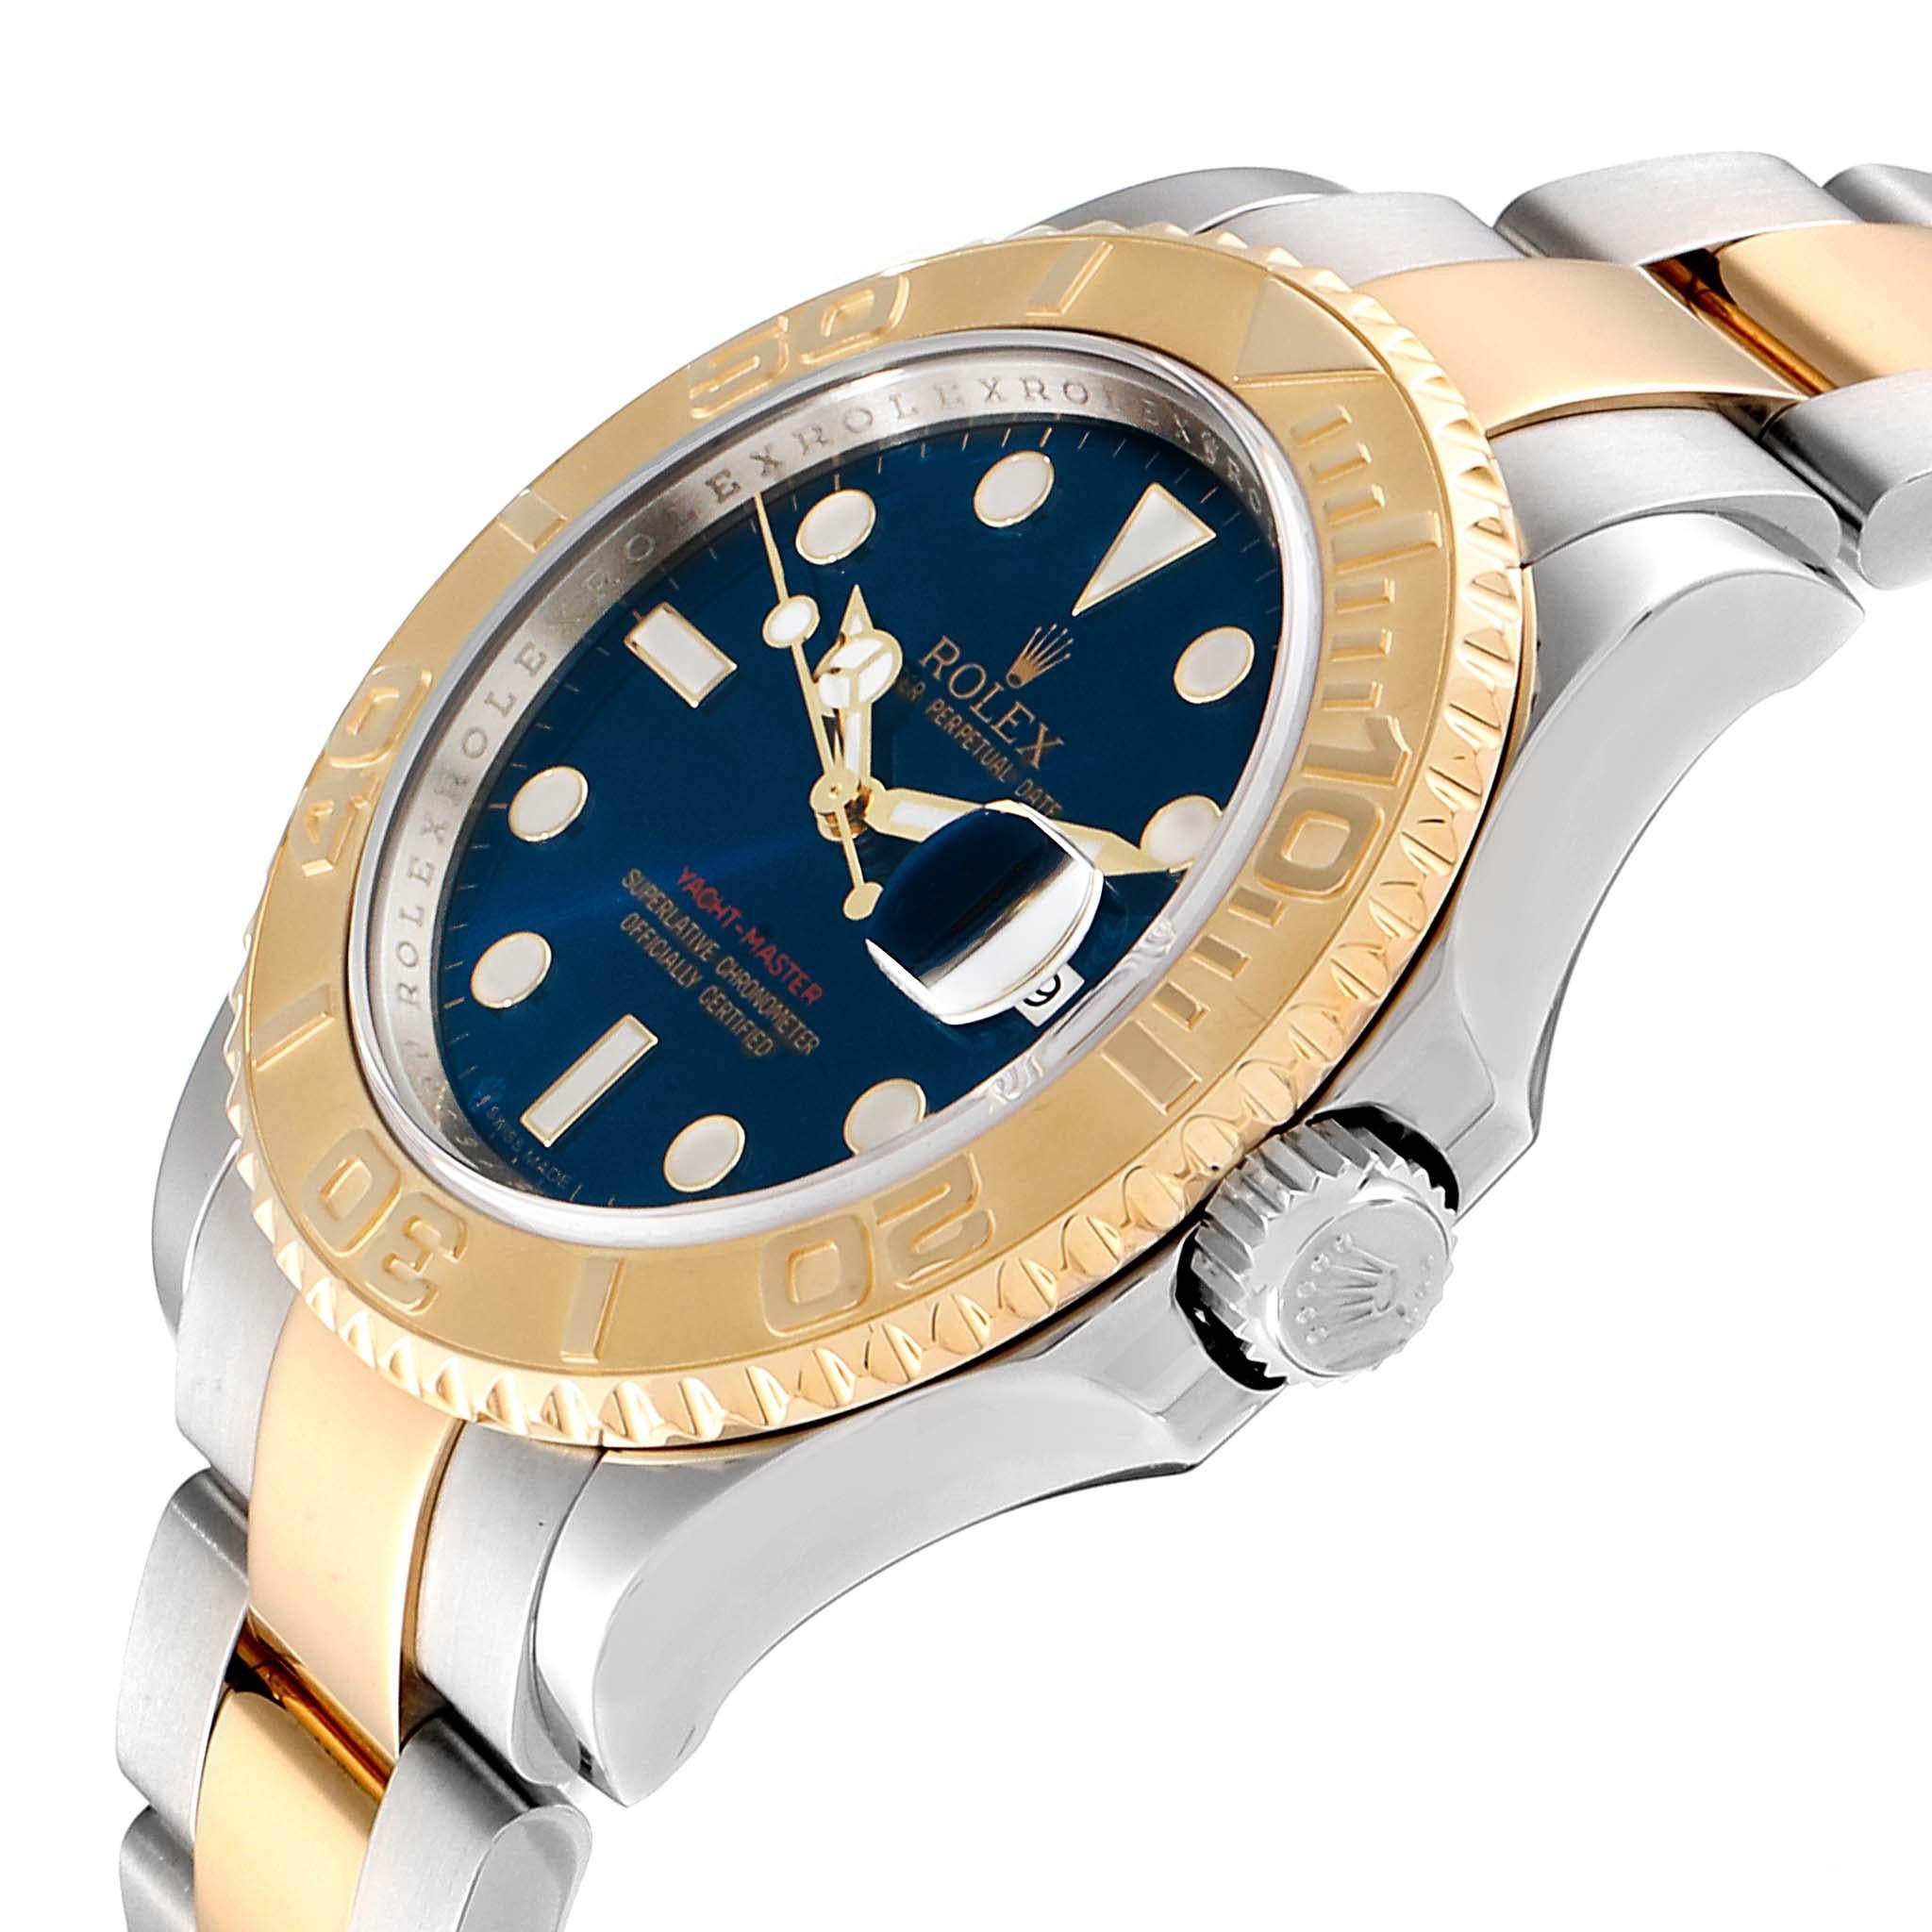 Rolex Yachtmaster Steel Yellow Gold Blue Dial Men's Watch 16623 2